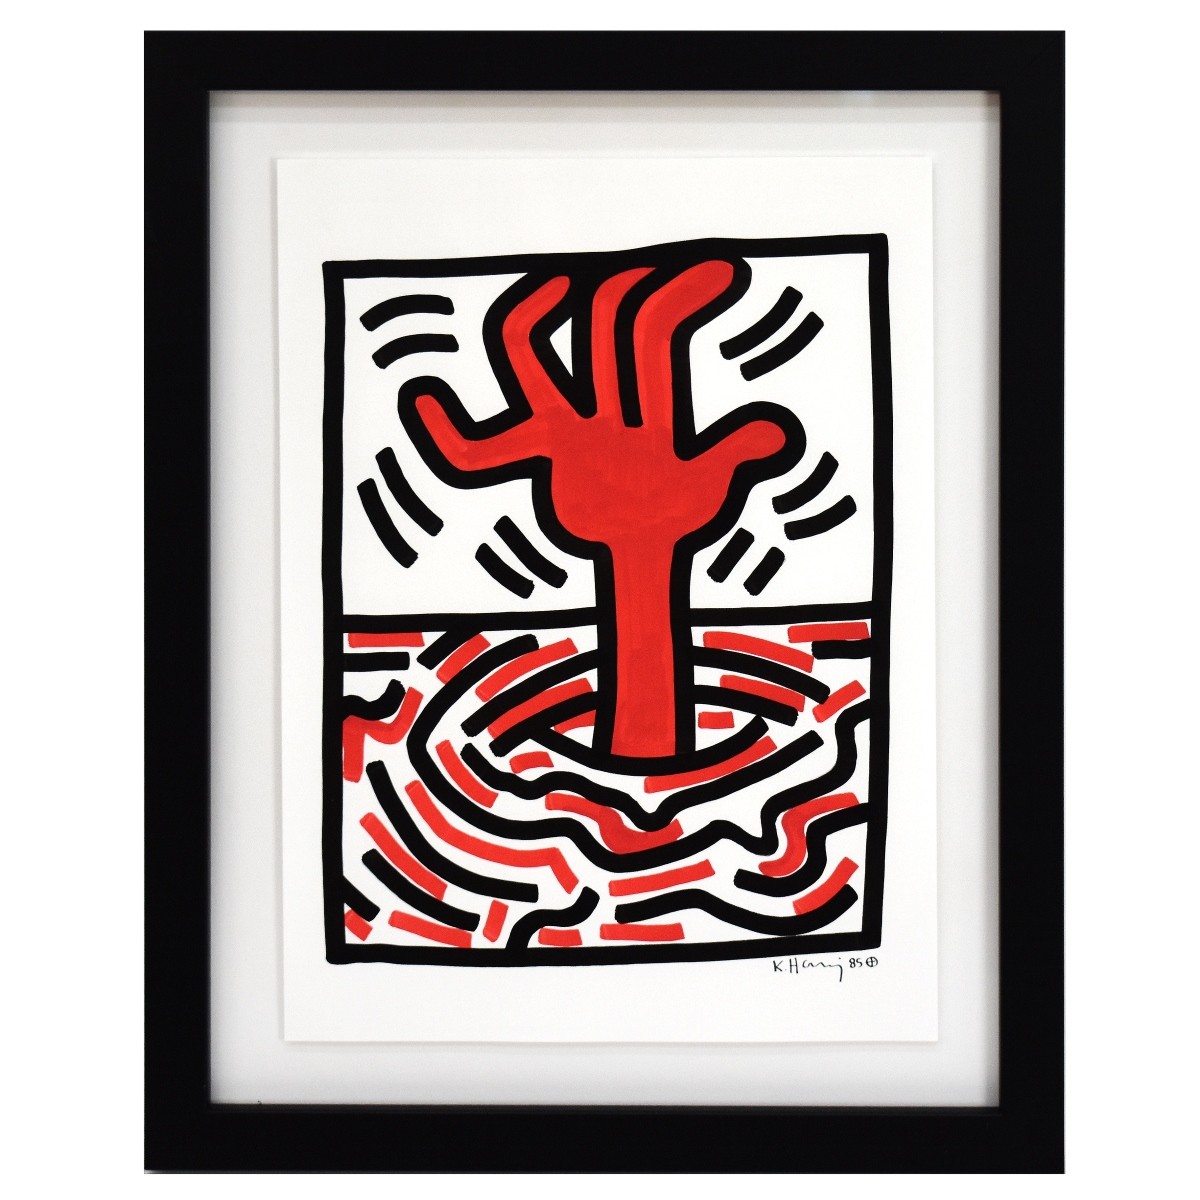 After: Keith Haring, American (1958 - 1990)